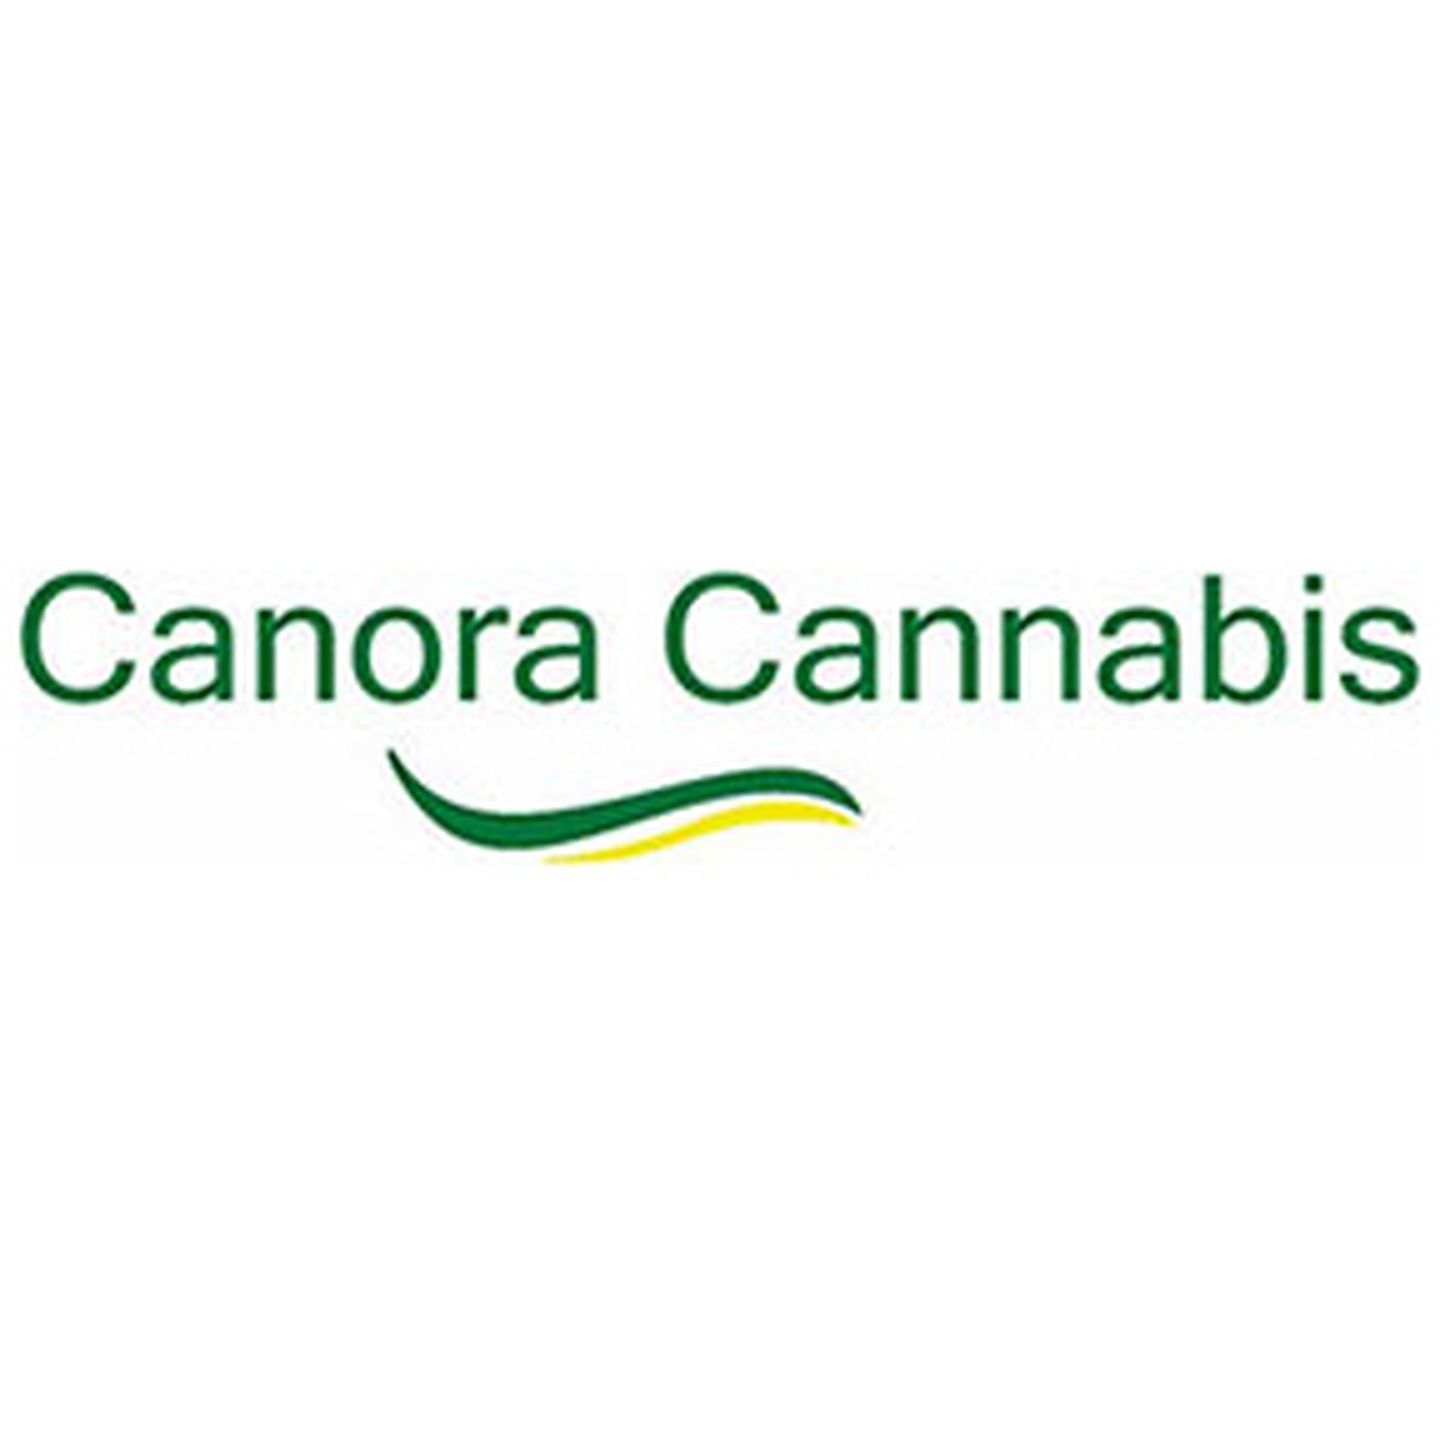 image feature Canora Cannabis